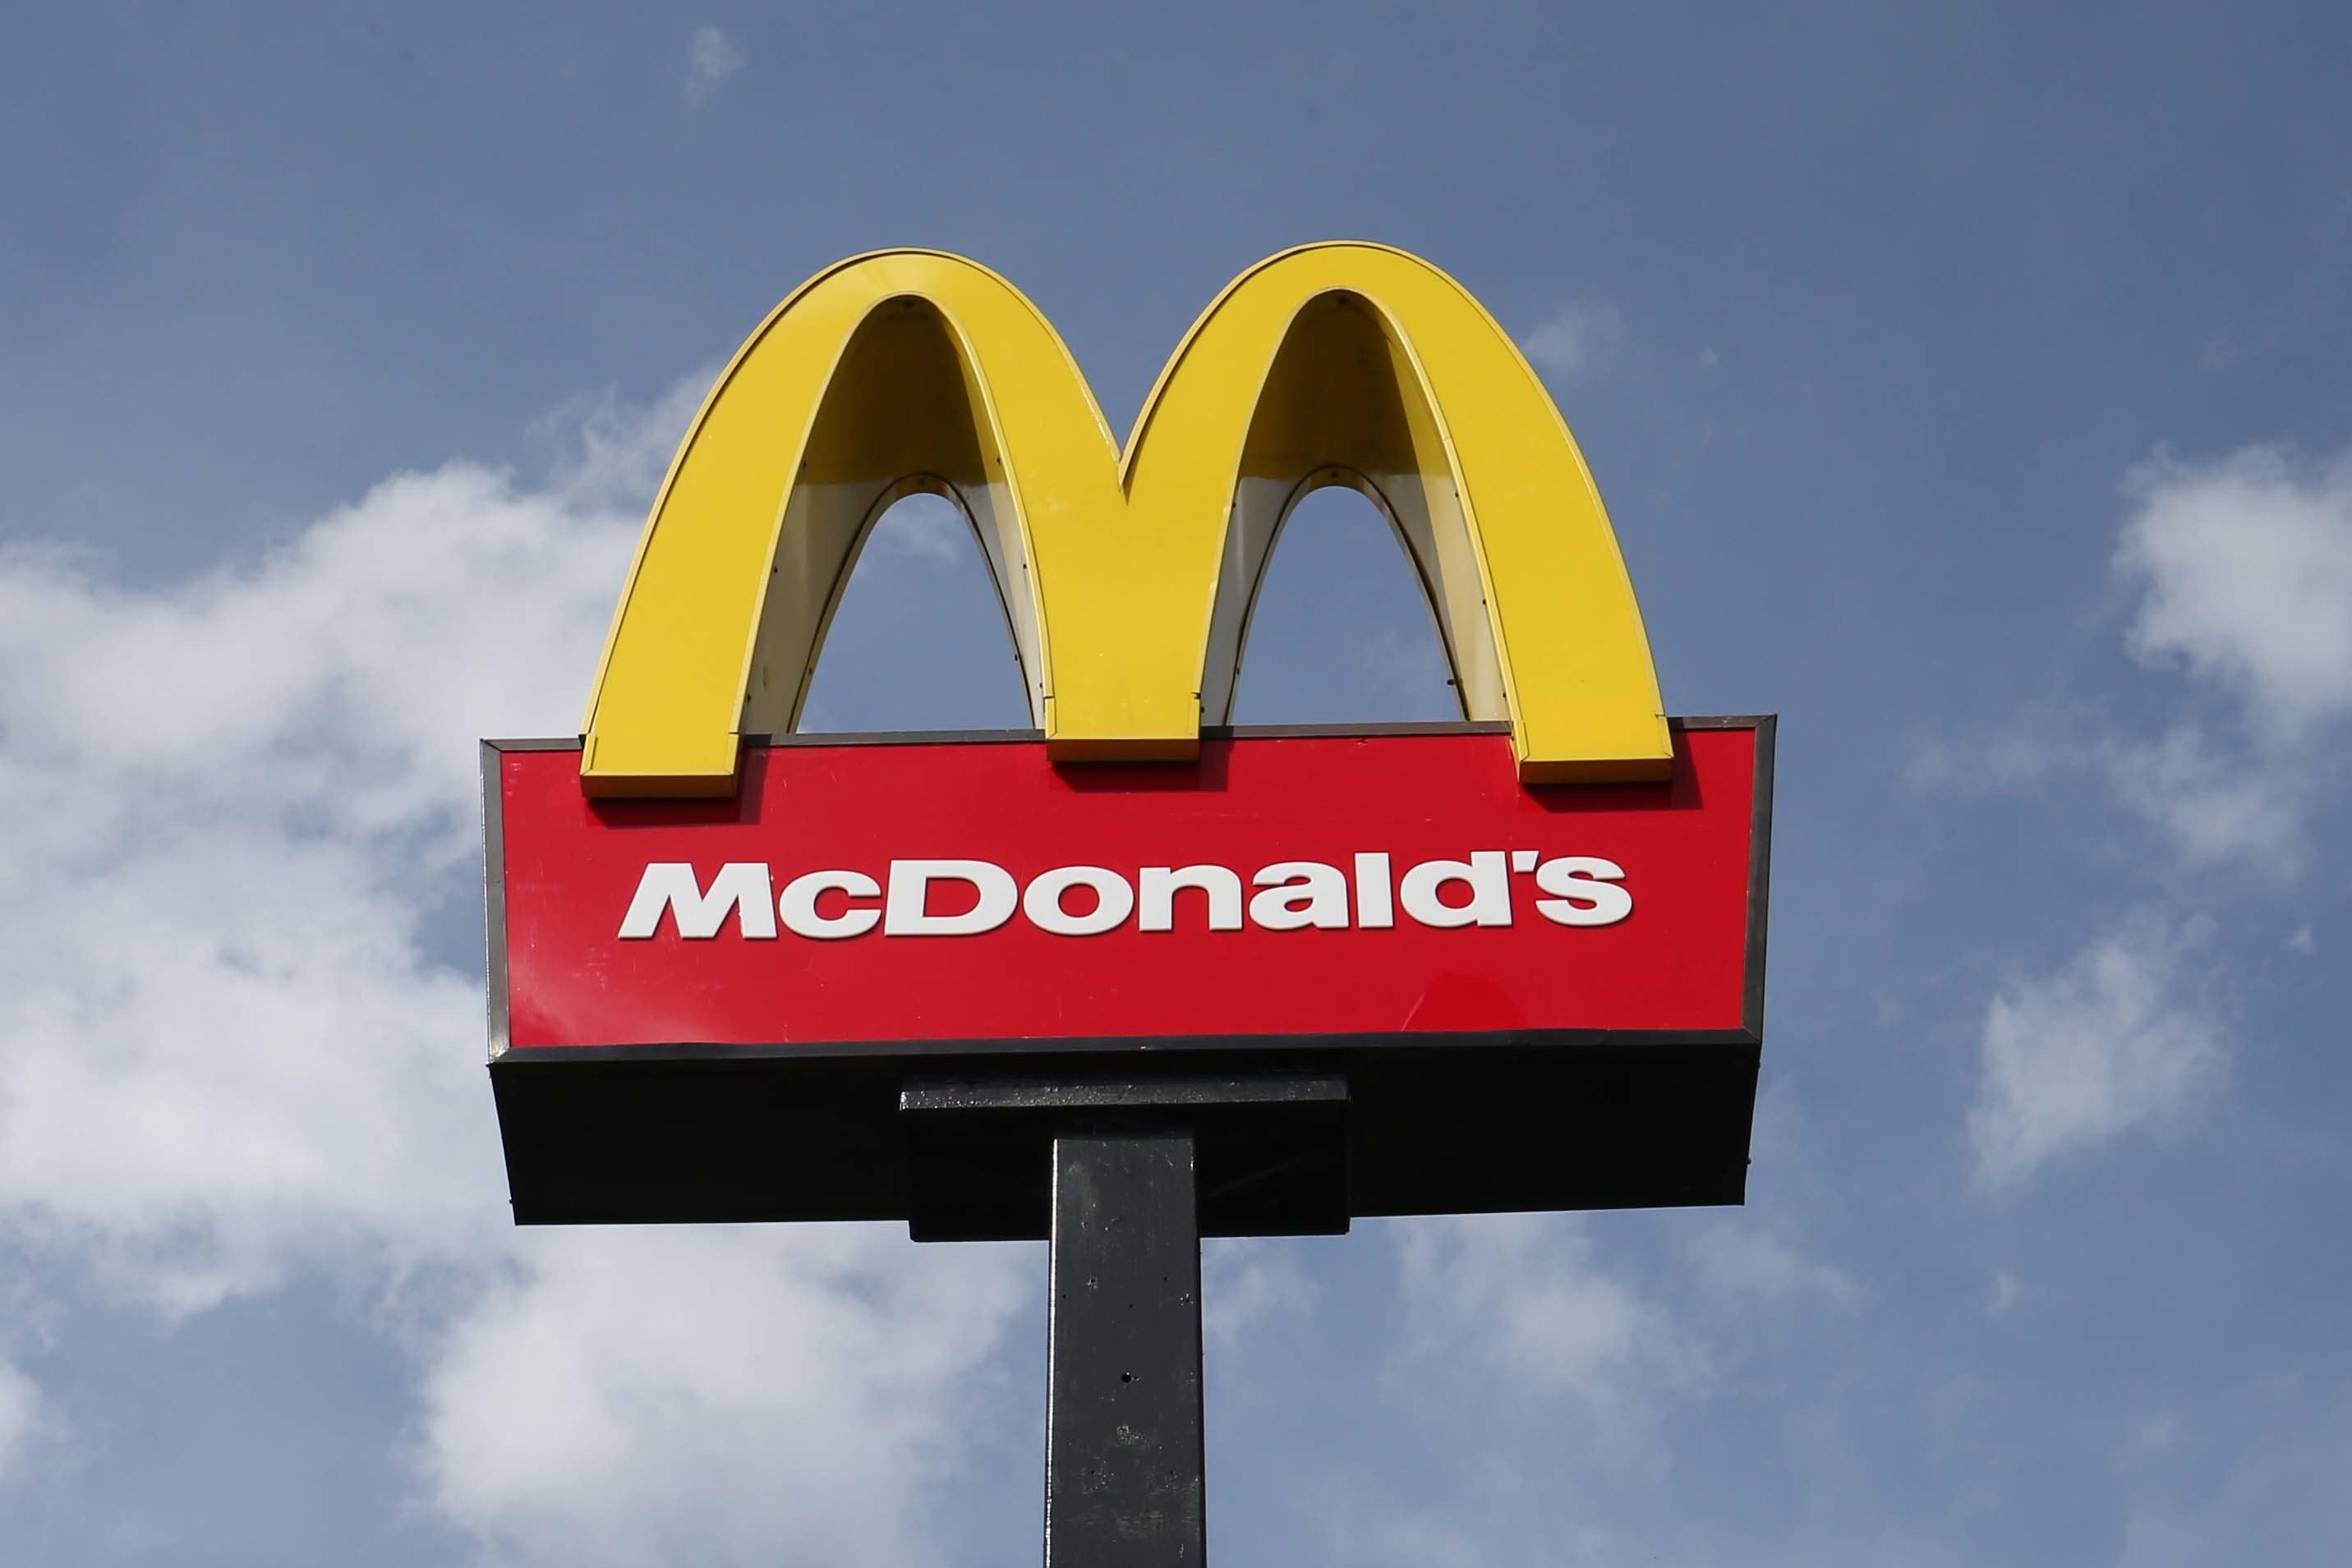 McDonalds sued over hot coffee spill three decades after landmark case The Independent pic